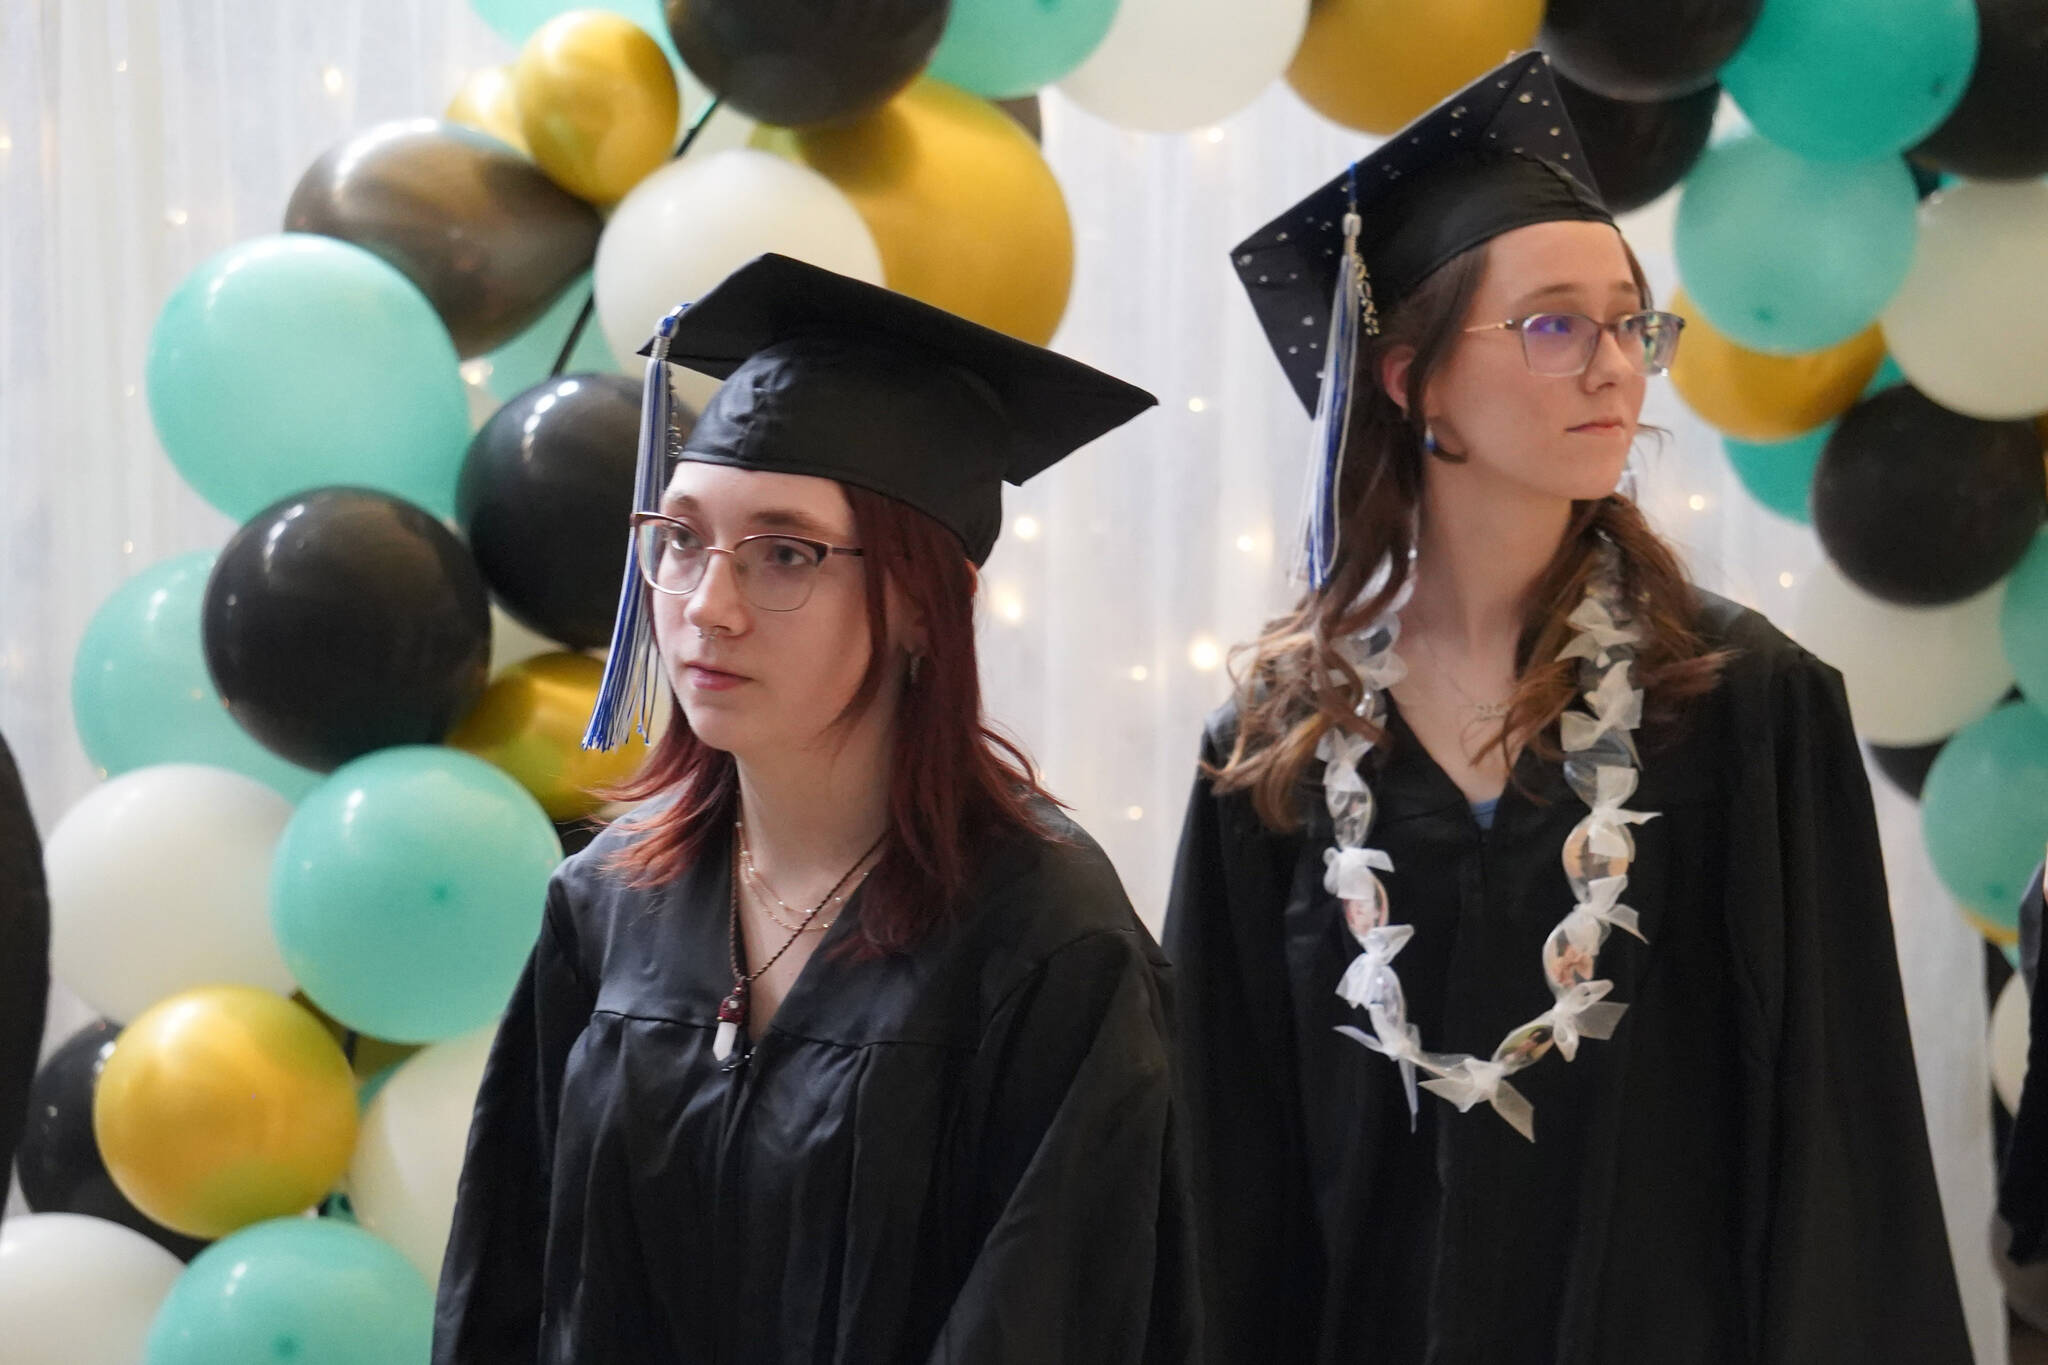 Connections Homeschool students prepare to enter the auditorium ahead of the Connections Homeschool graduation ceremony on Thursday, May 18, 2023, at Soldotna High School in Soldotna, Alaska. (Jake Dye/Peninsula Clarion)